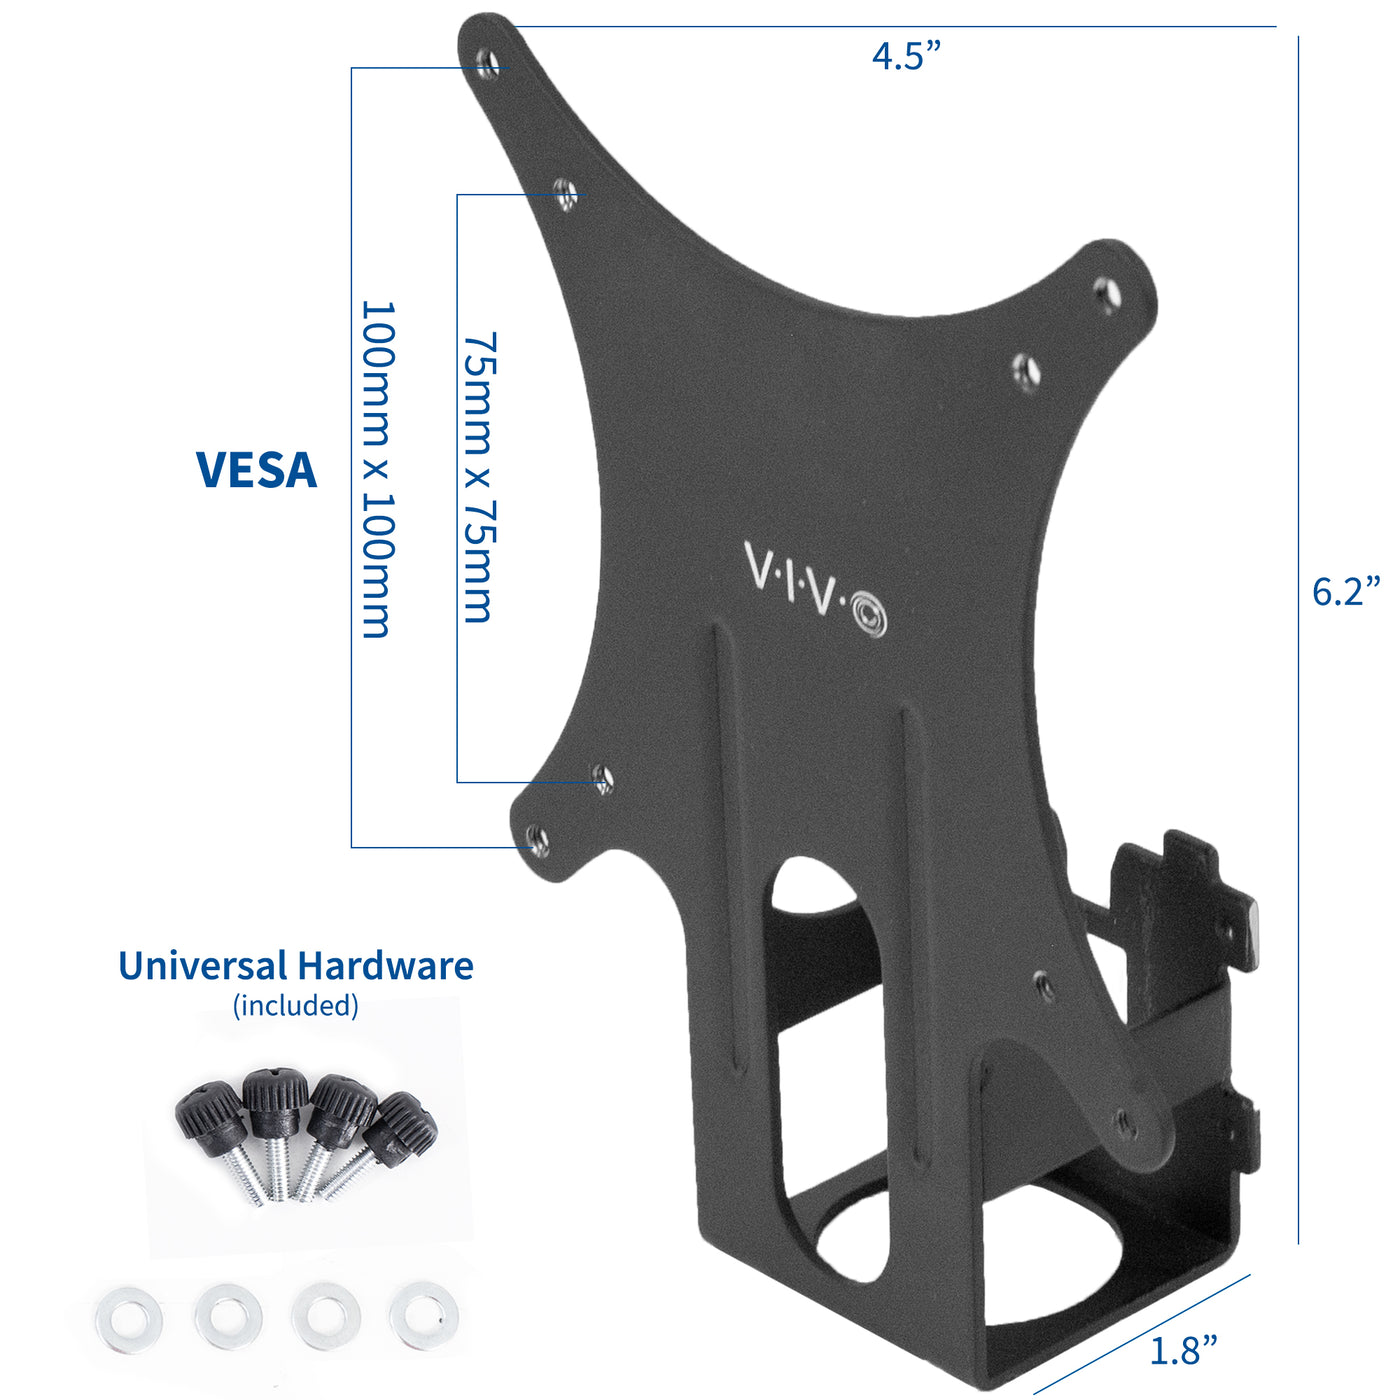 Universal hardware included with standard VESA plate adapter.